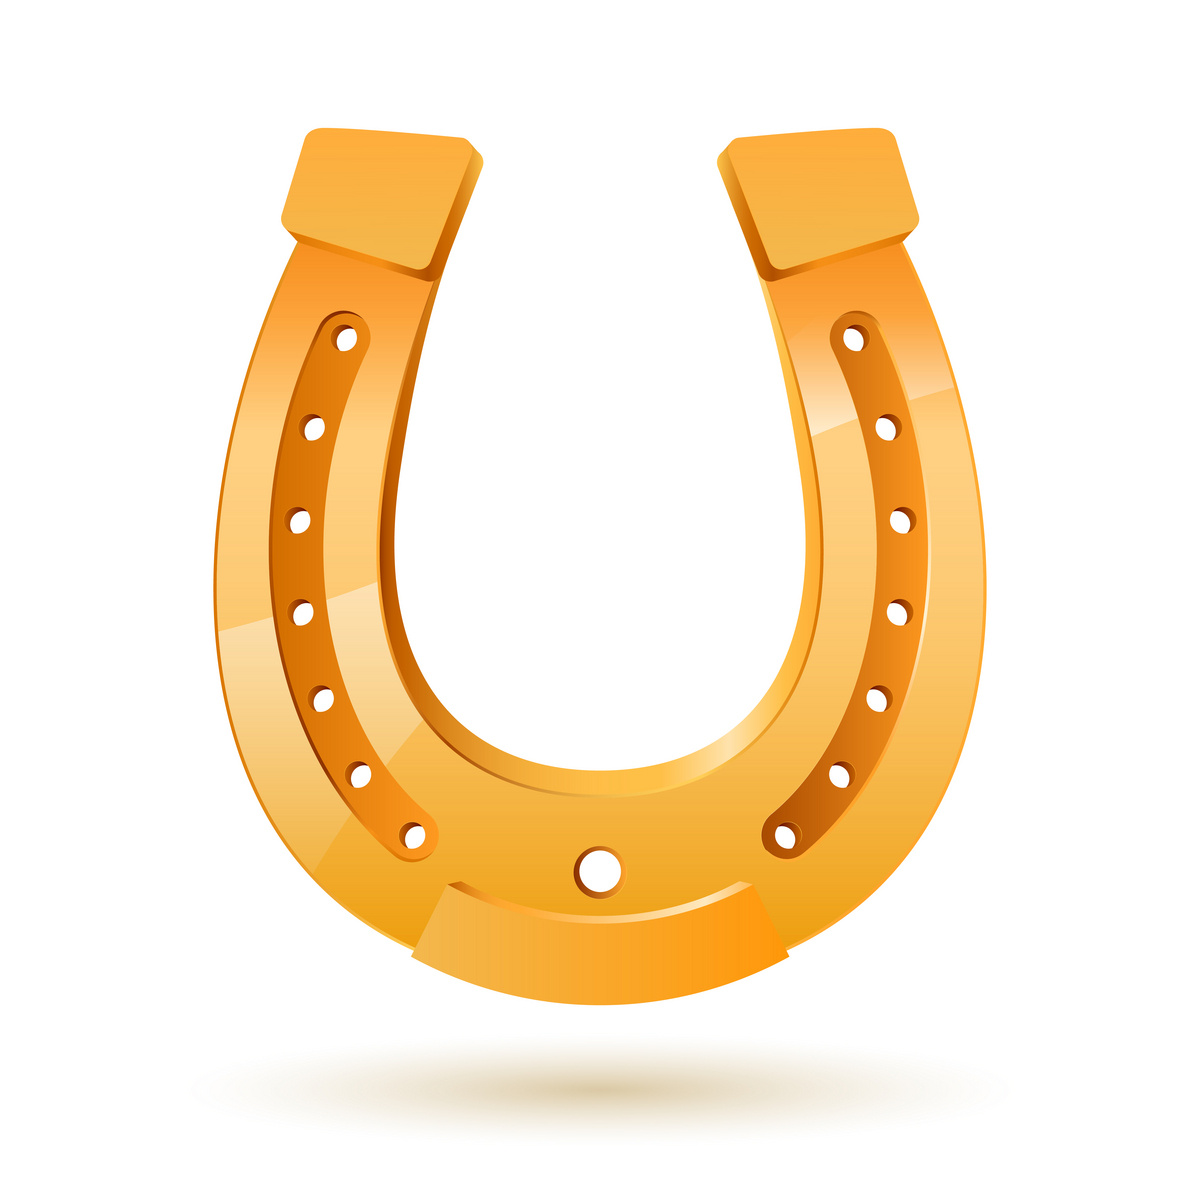 14 Horseshoe Template Free Cliparts That You Can Download To You